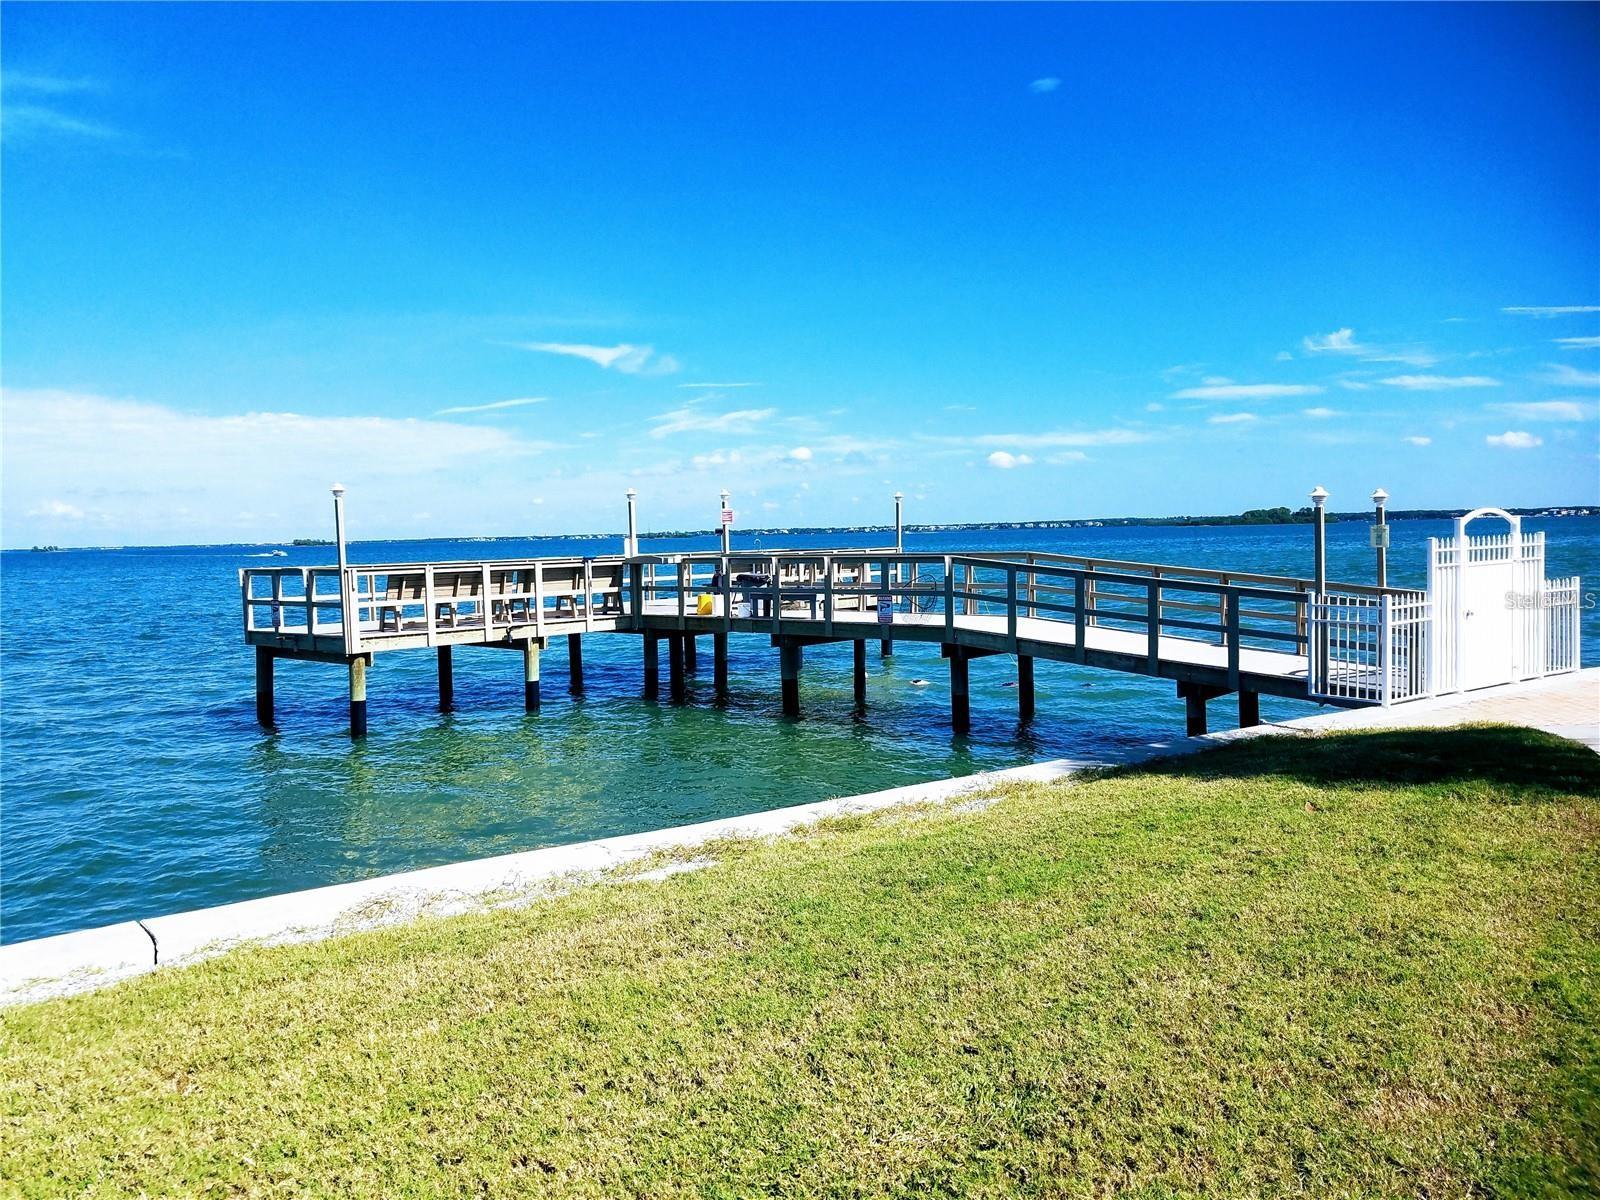 Community dock with community fishing license